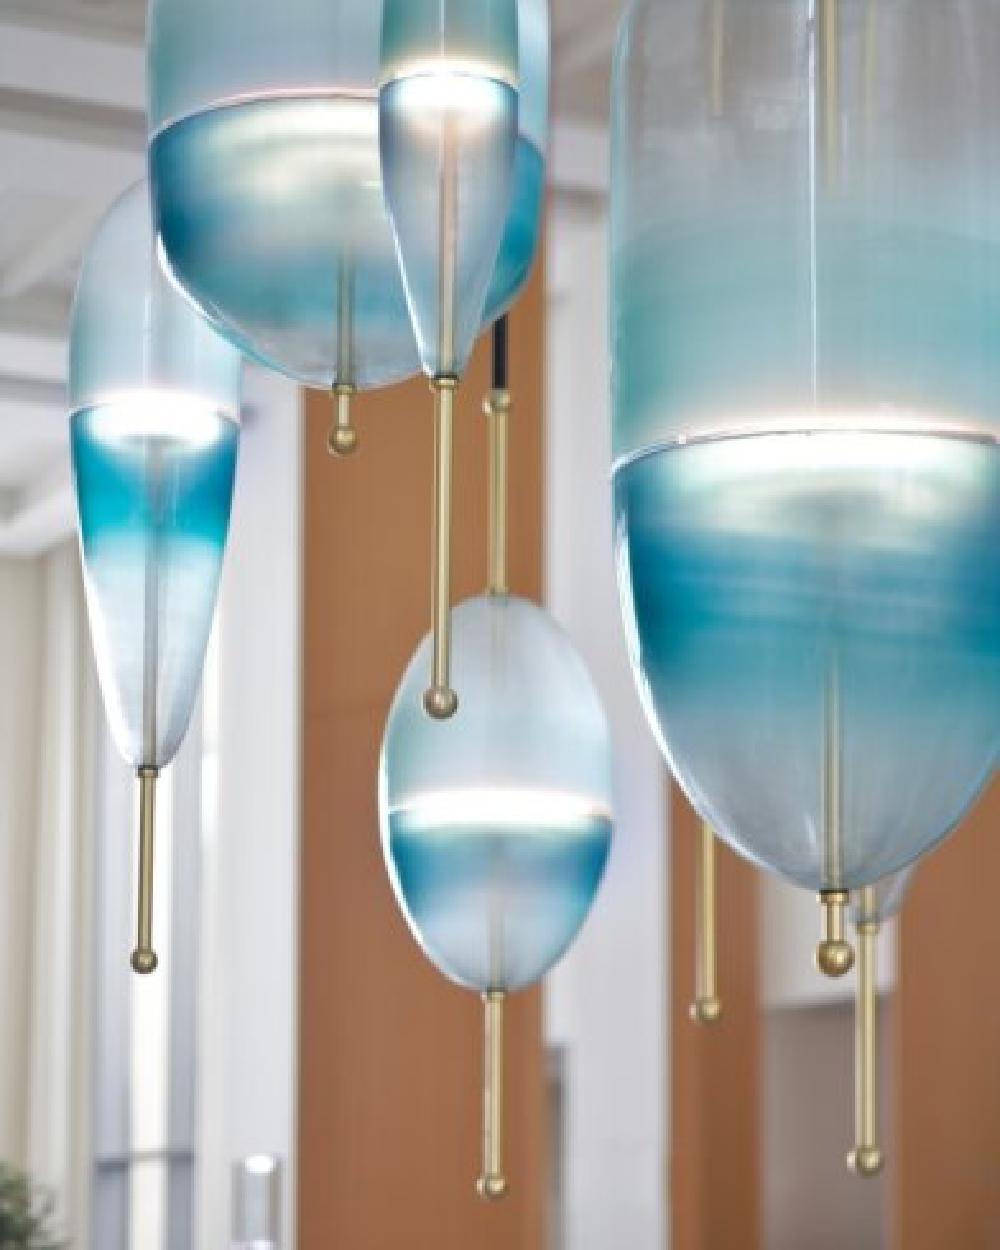 FLOW[T] S1 Pendant lamp in Turquoise by Nao Tamura for Wonderglass For Sale 3